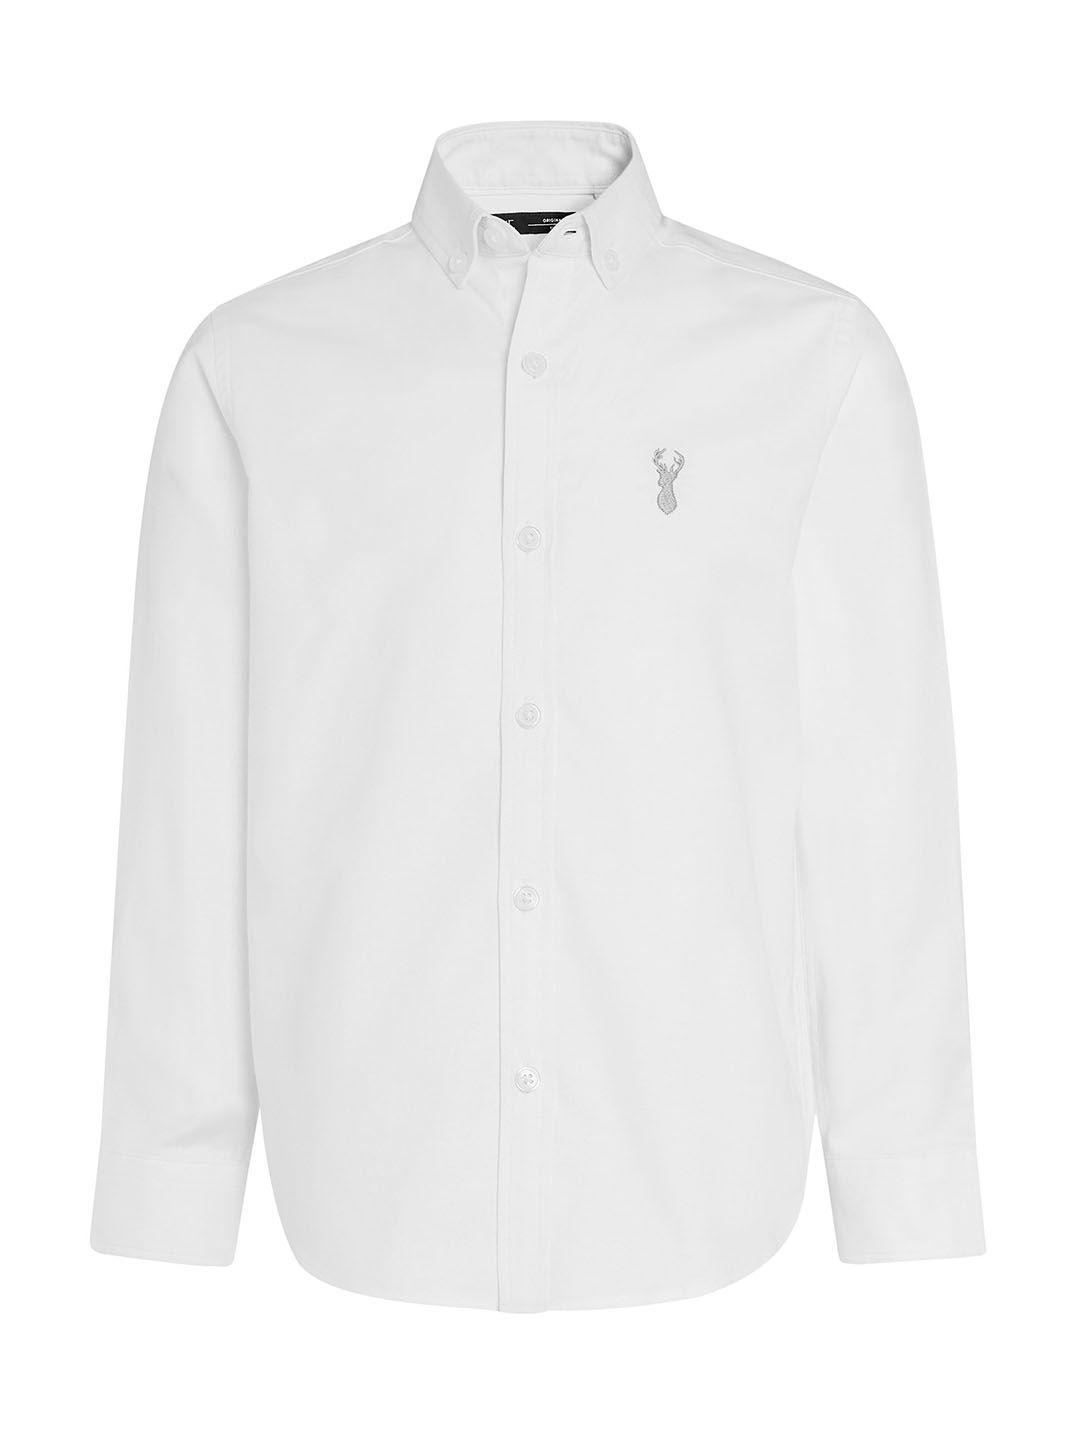 NEXT Boys White Regular Fit Solid Casual Shirt